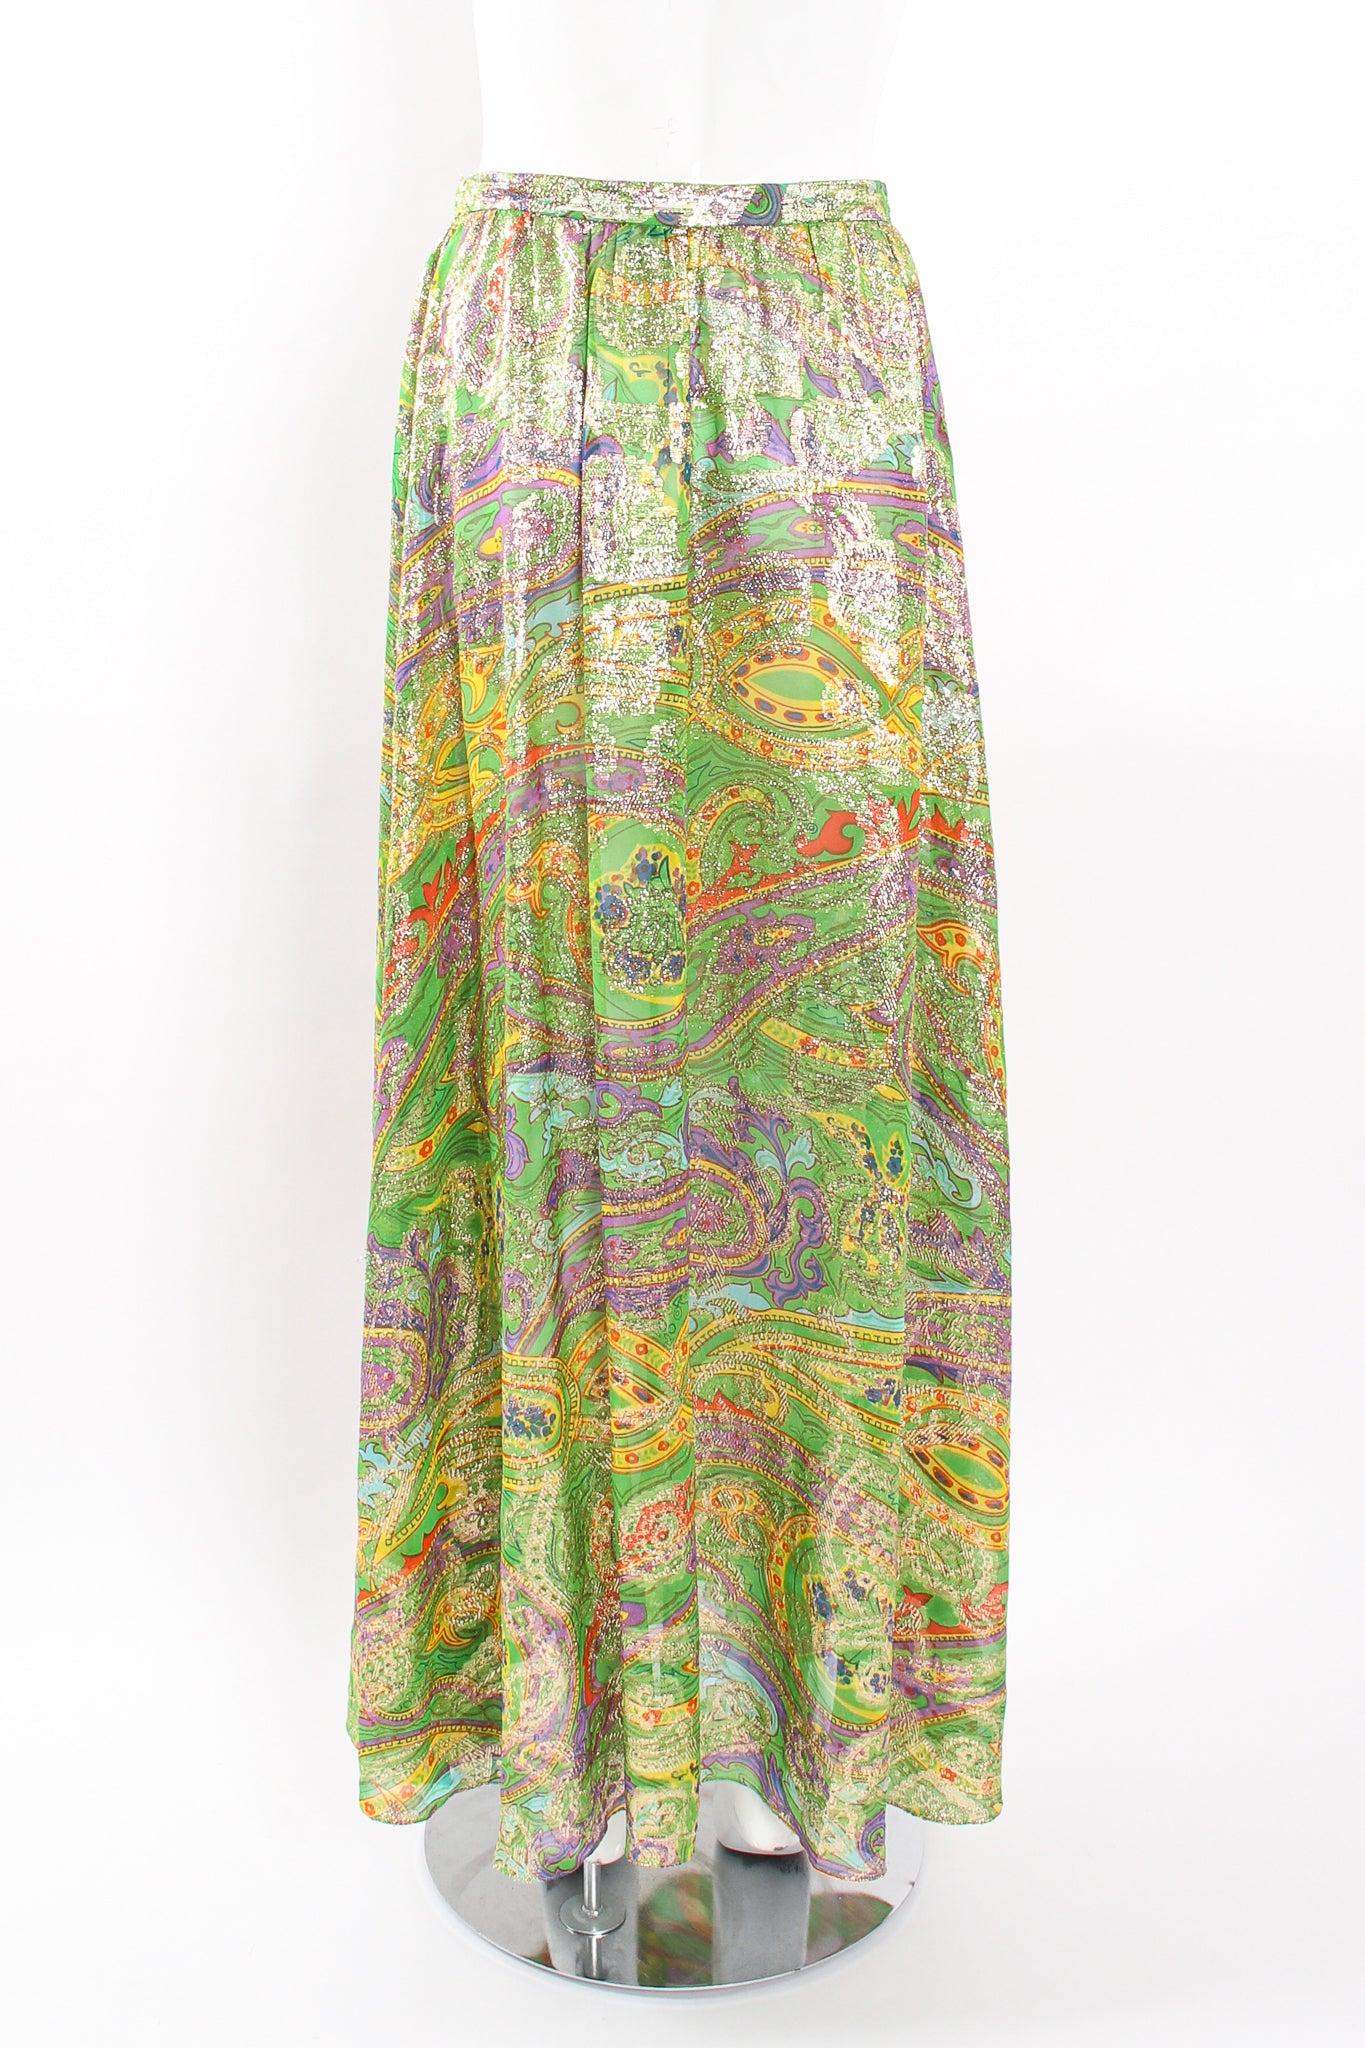 Vintage Malcolm Starr Paisley Brocade Maxi Skirt on Mannequin back at Recess Los Angeles